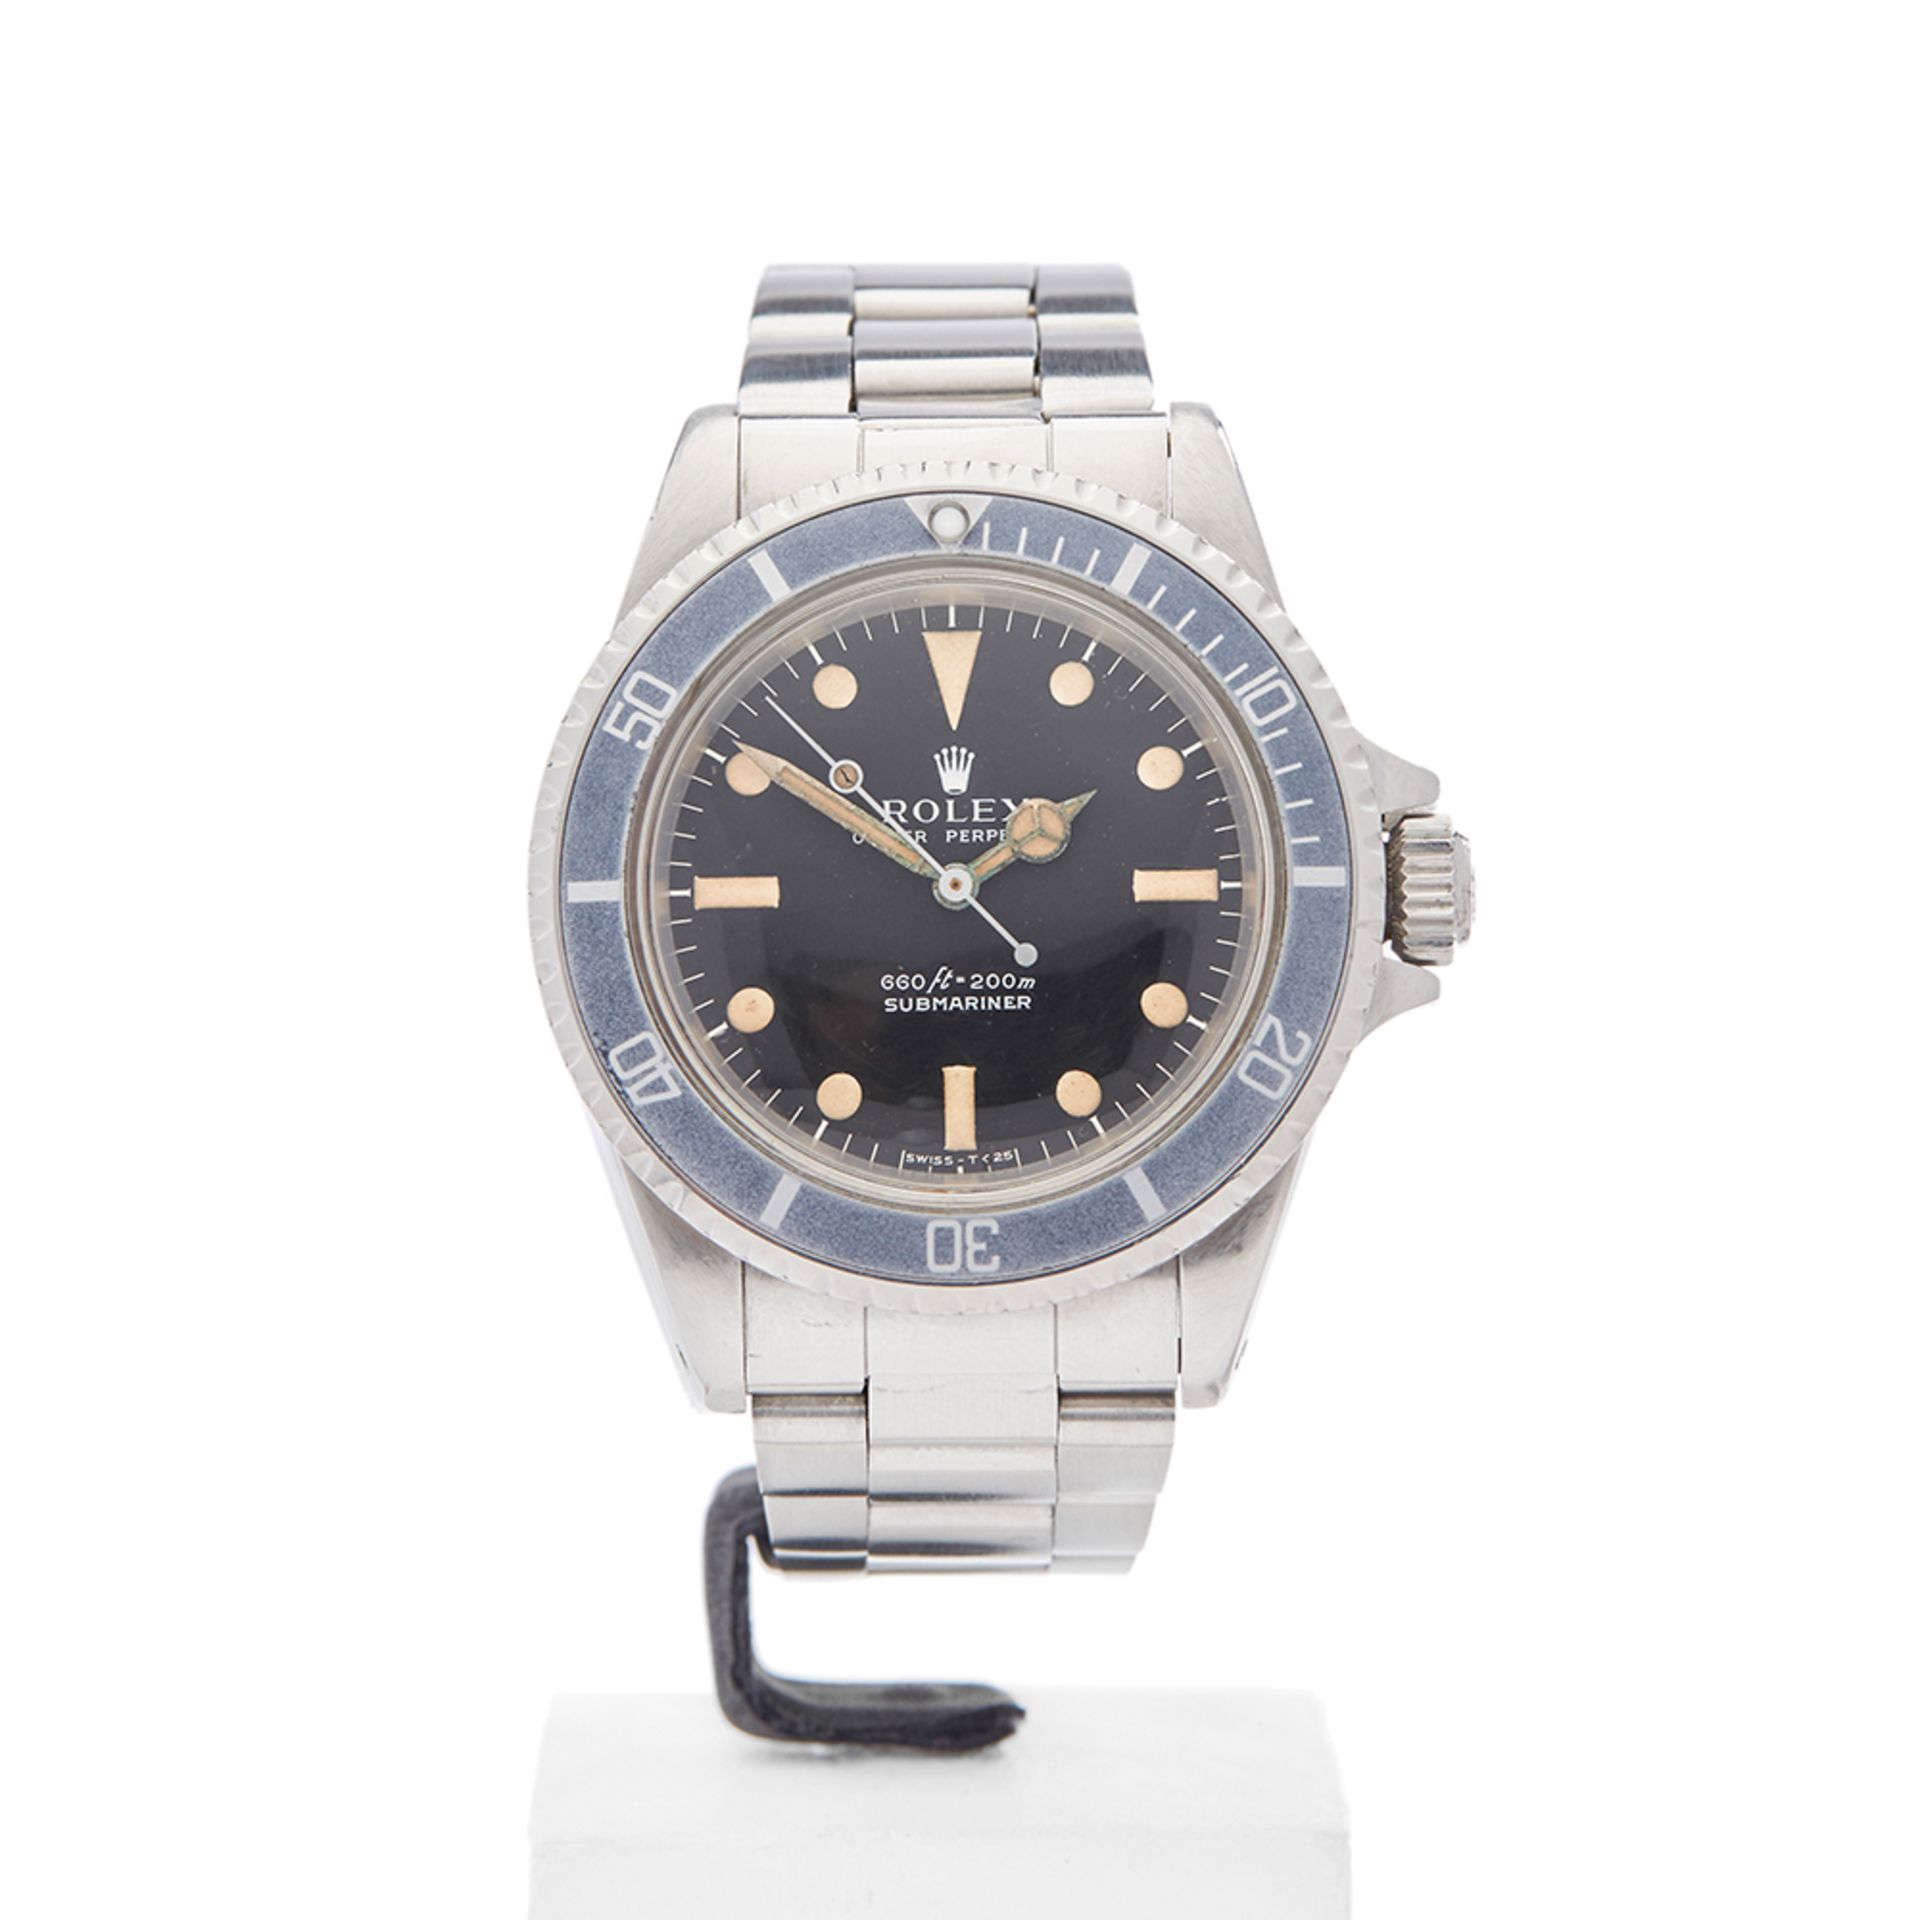 Rolex Submariner Serif Dial 40mm Stainless Steel - 5513 - Image 2 of 9